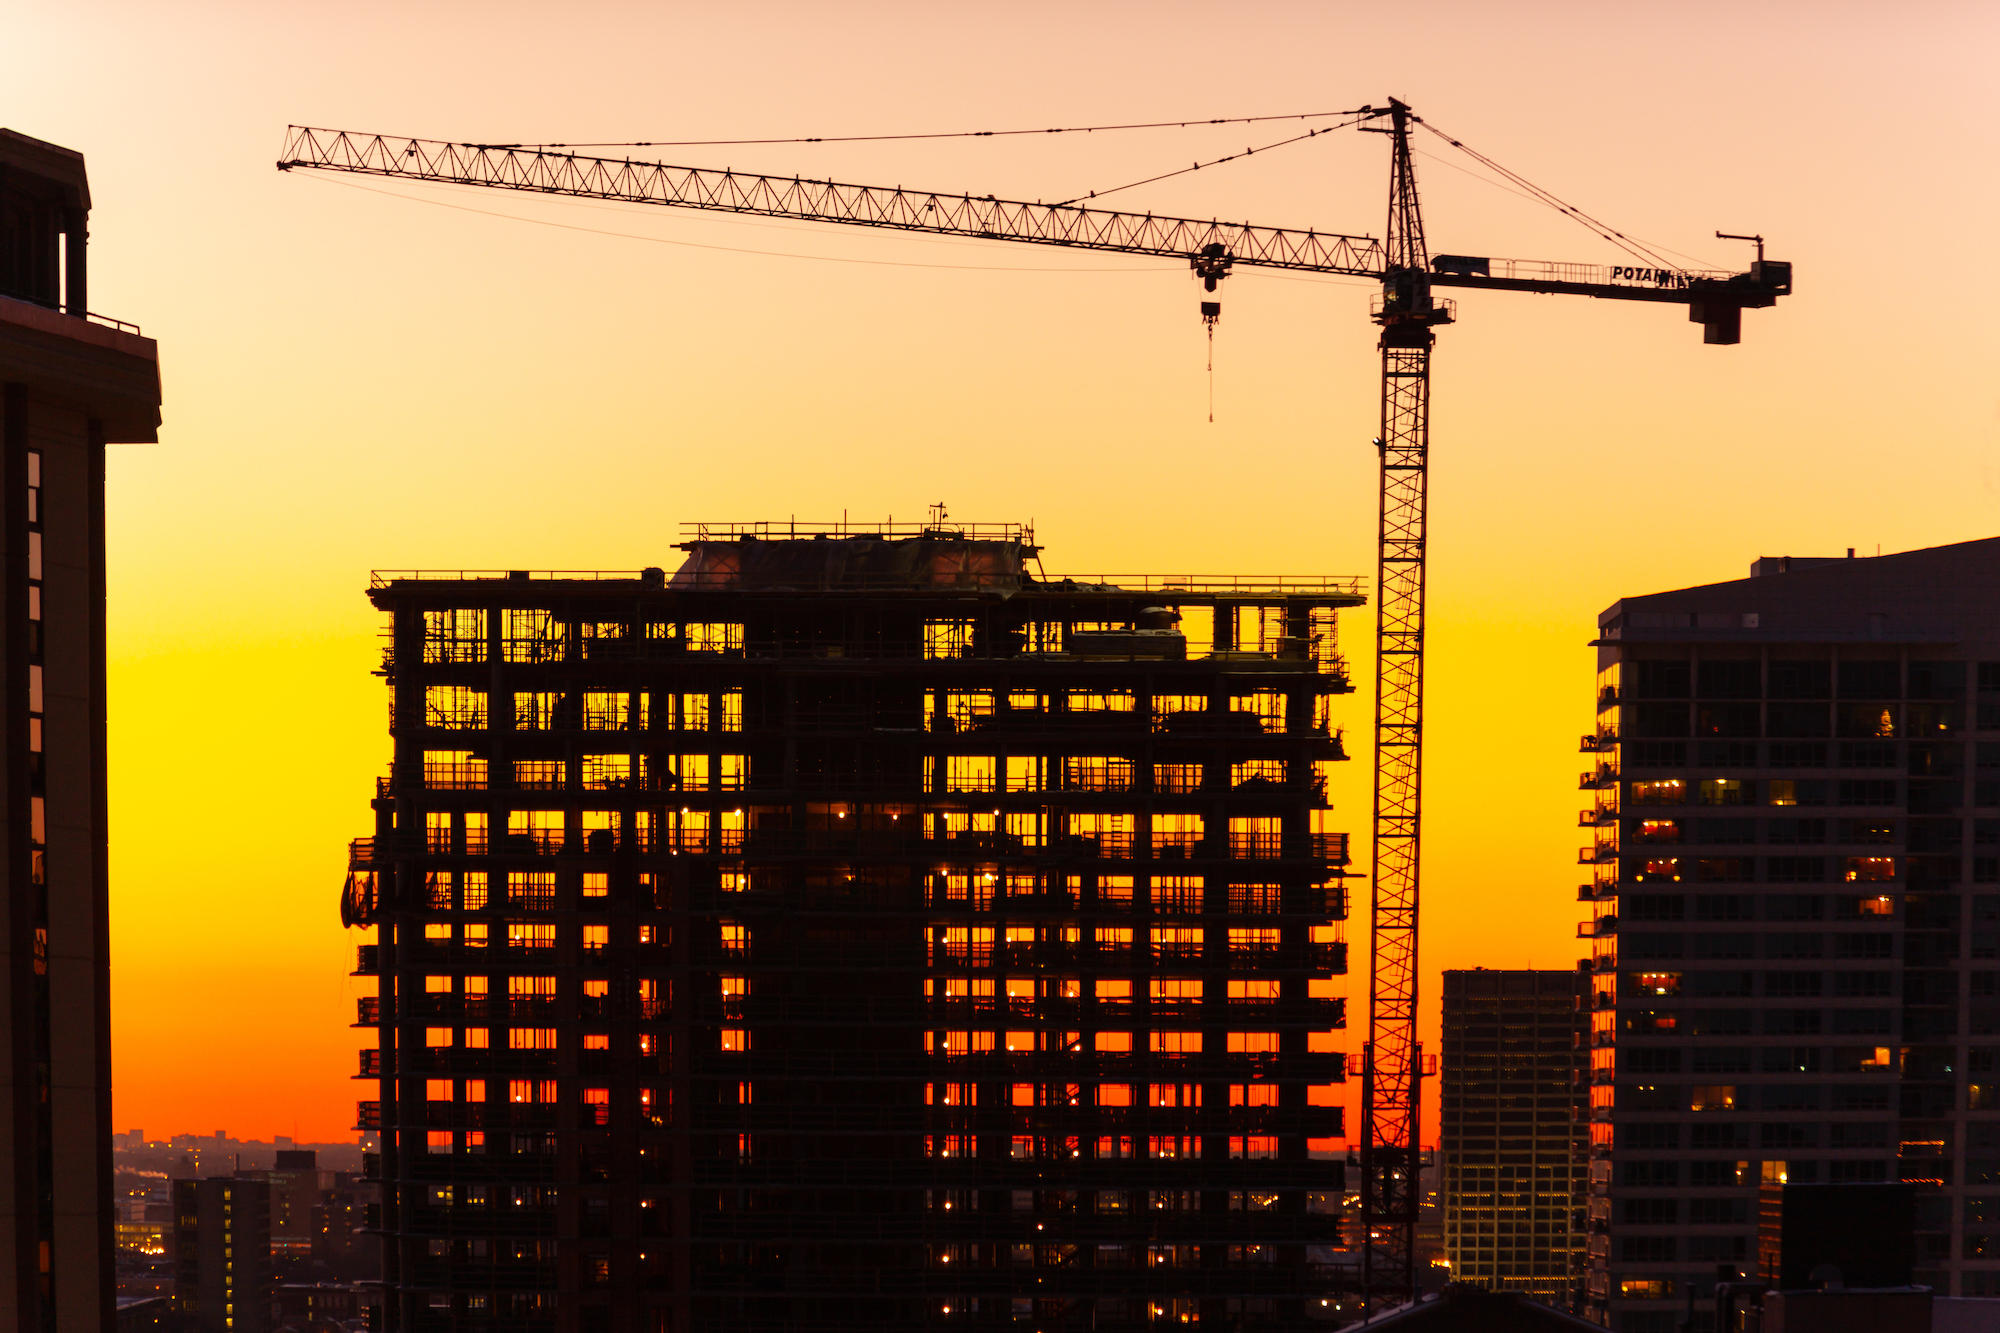 Silhouette Of Crane And Building Under Construction At Dusk.